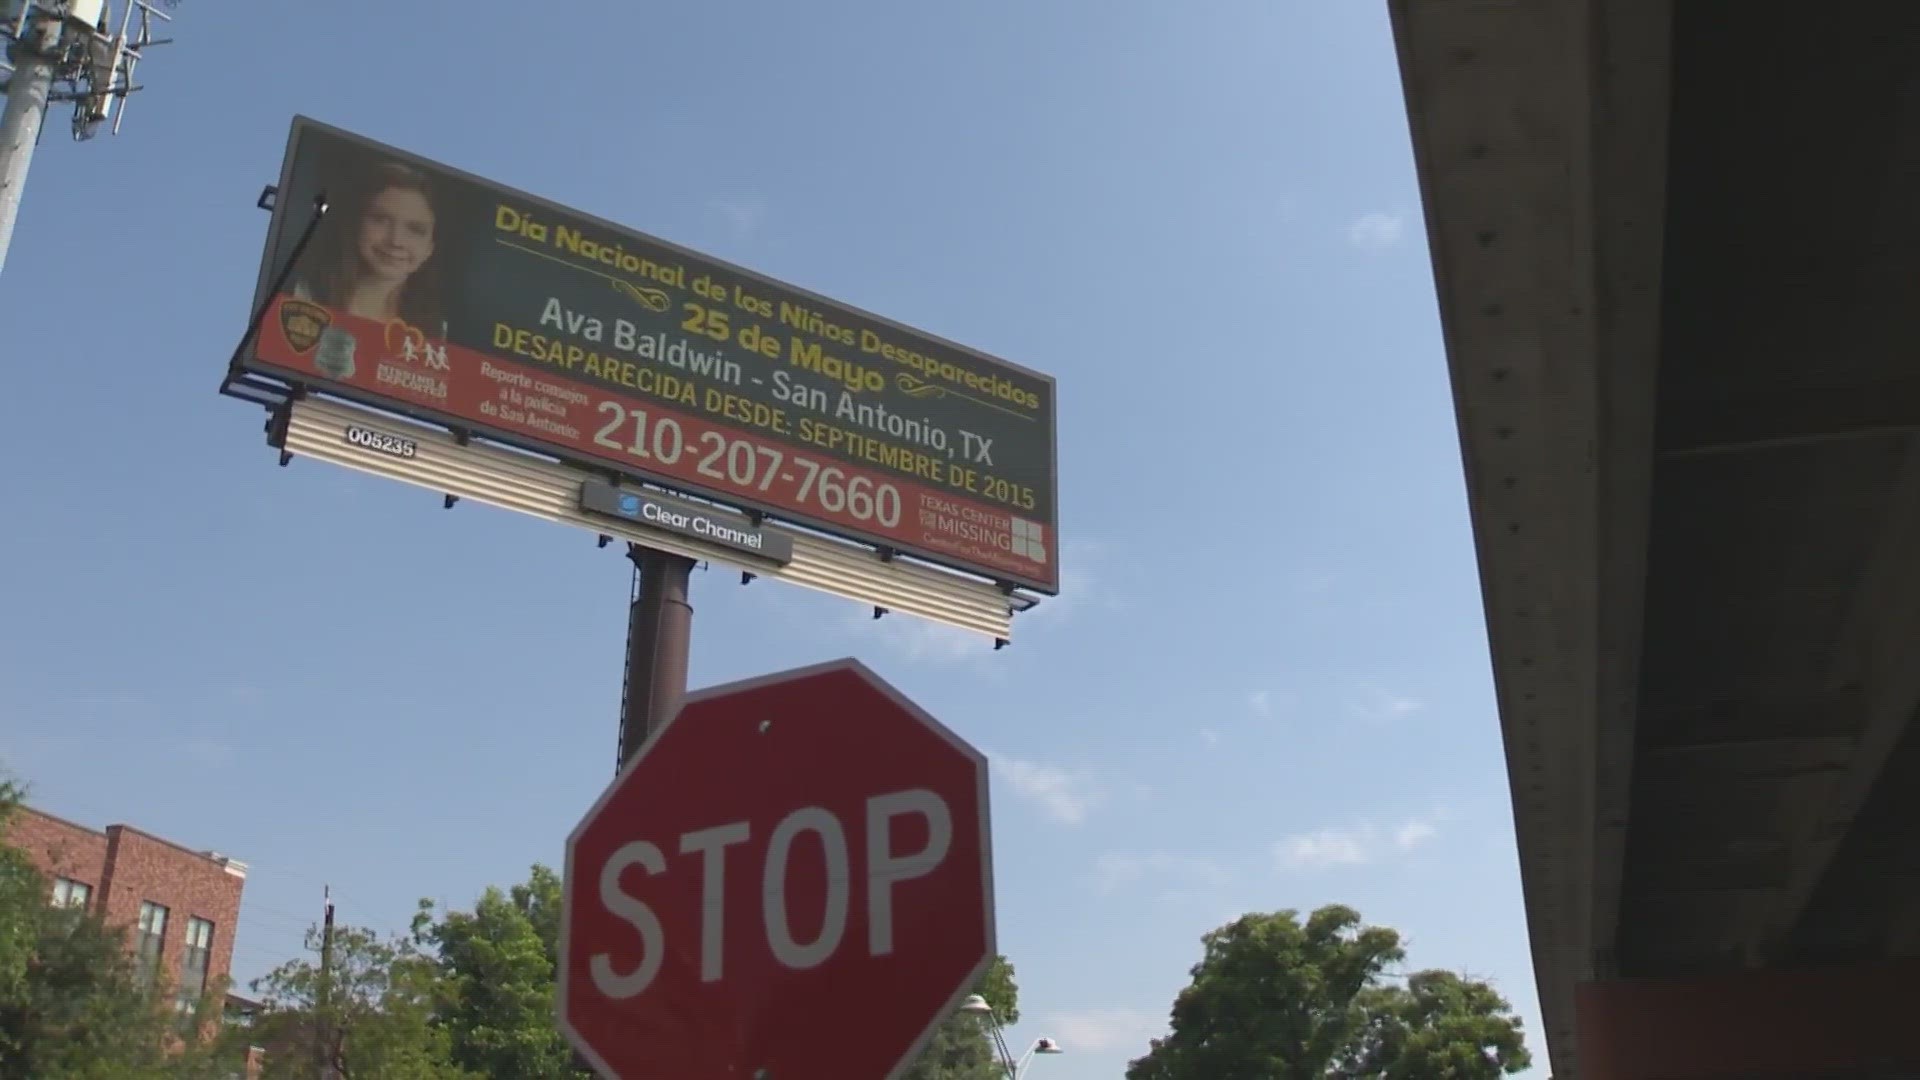 Clear Channel billboards will display two of the children missing throughout the next month.